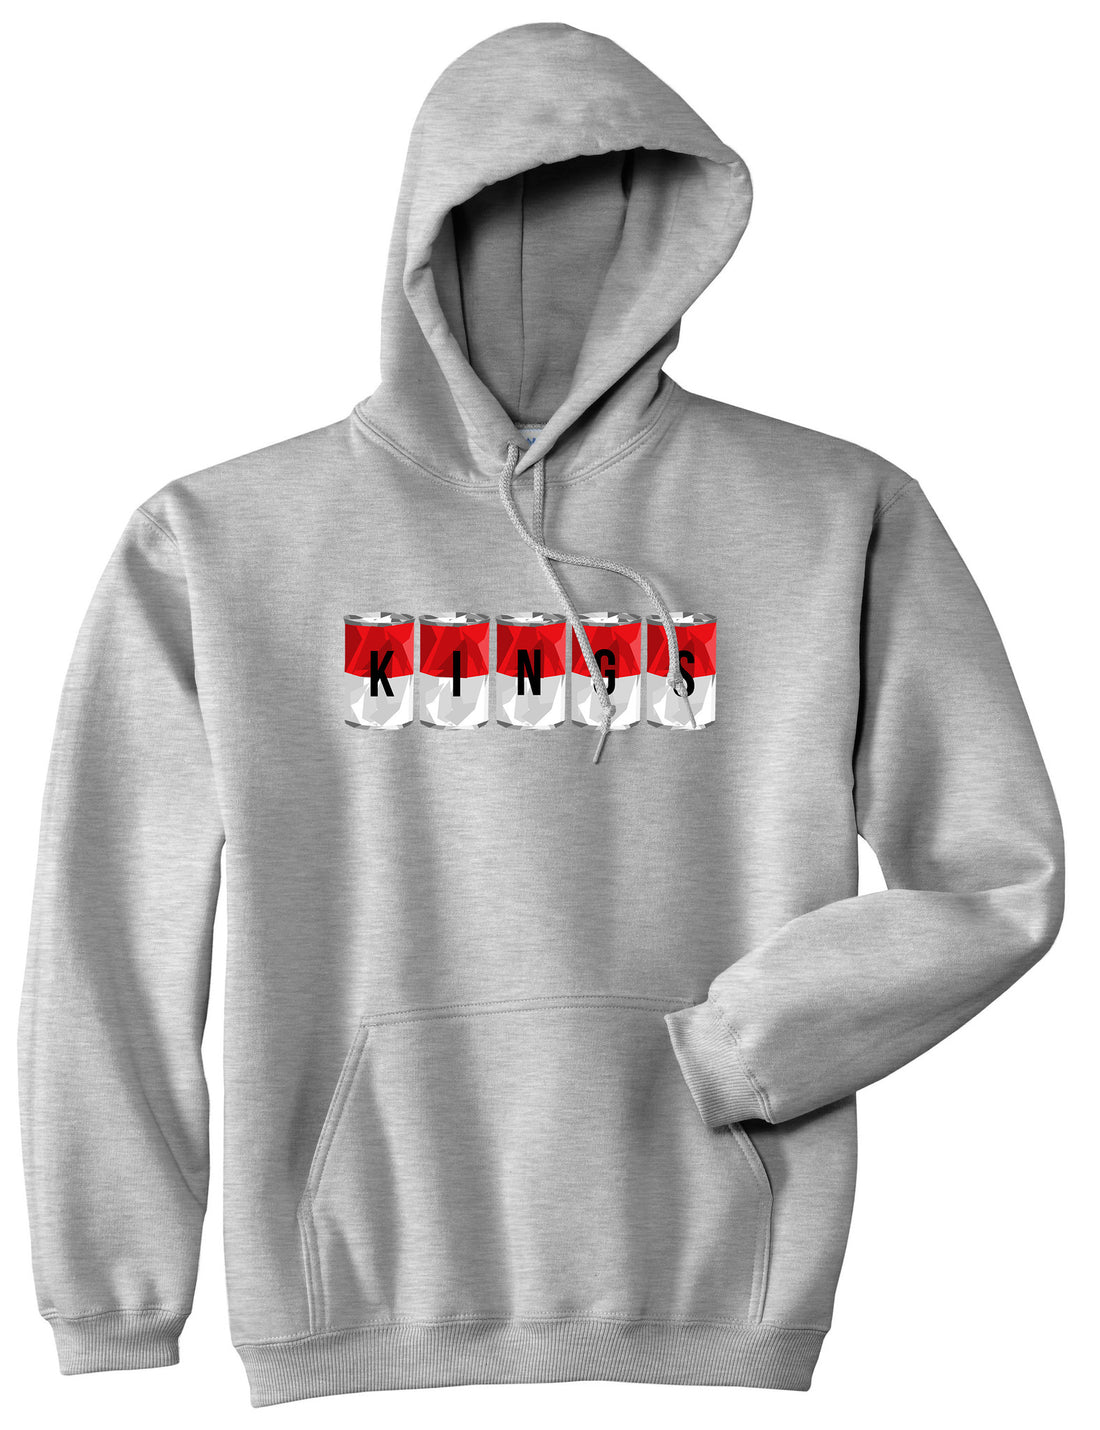 Tomato Soup Cans Pullover Hoodie in Grey